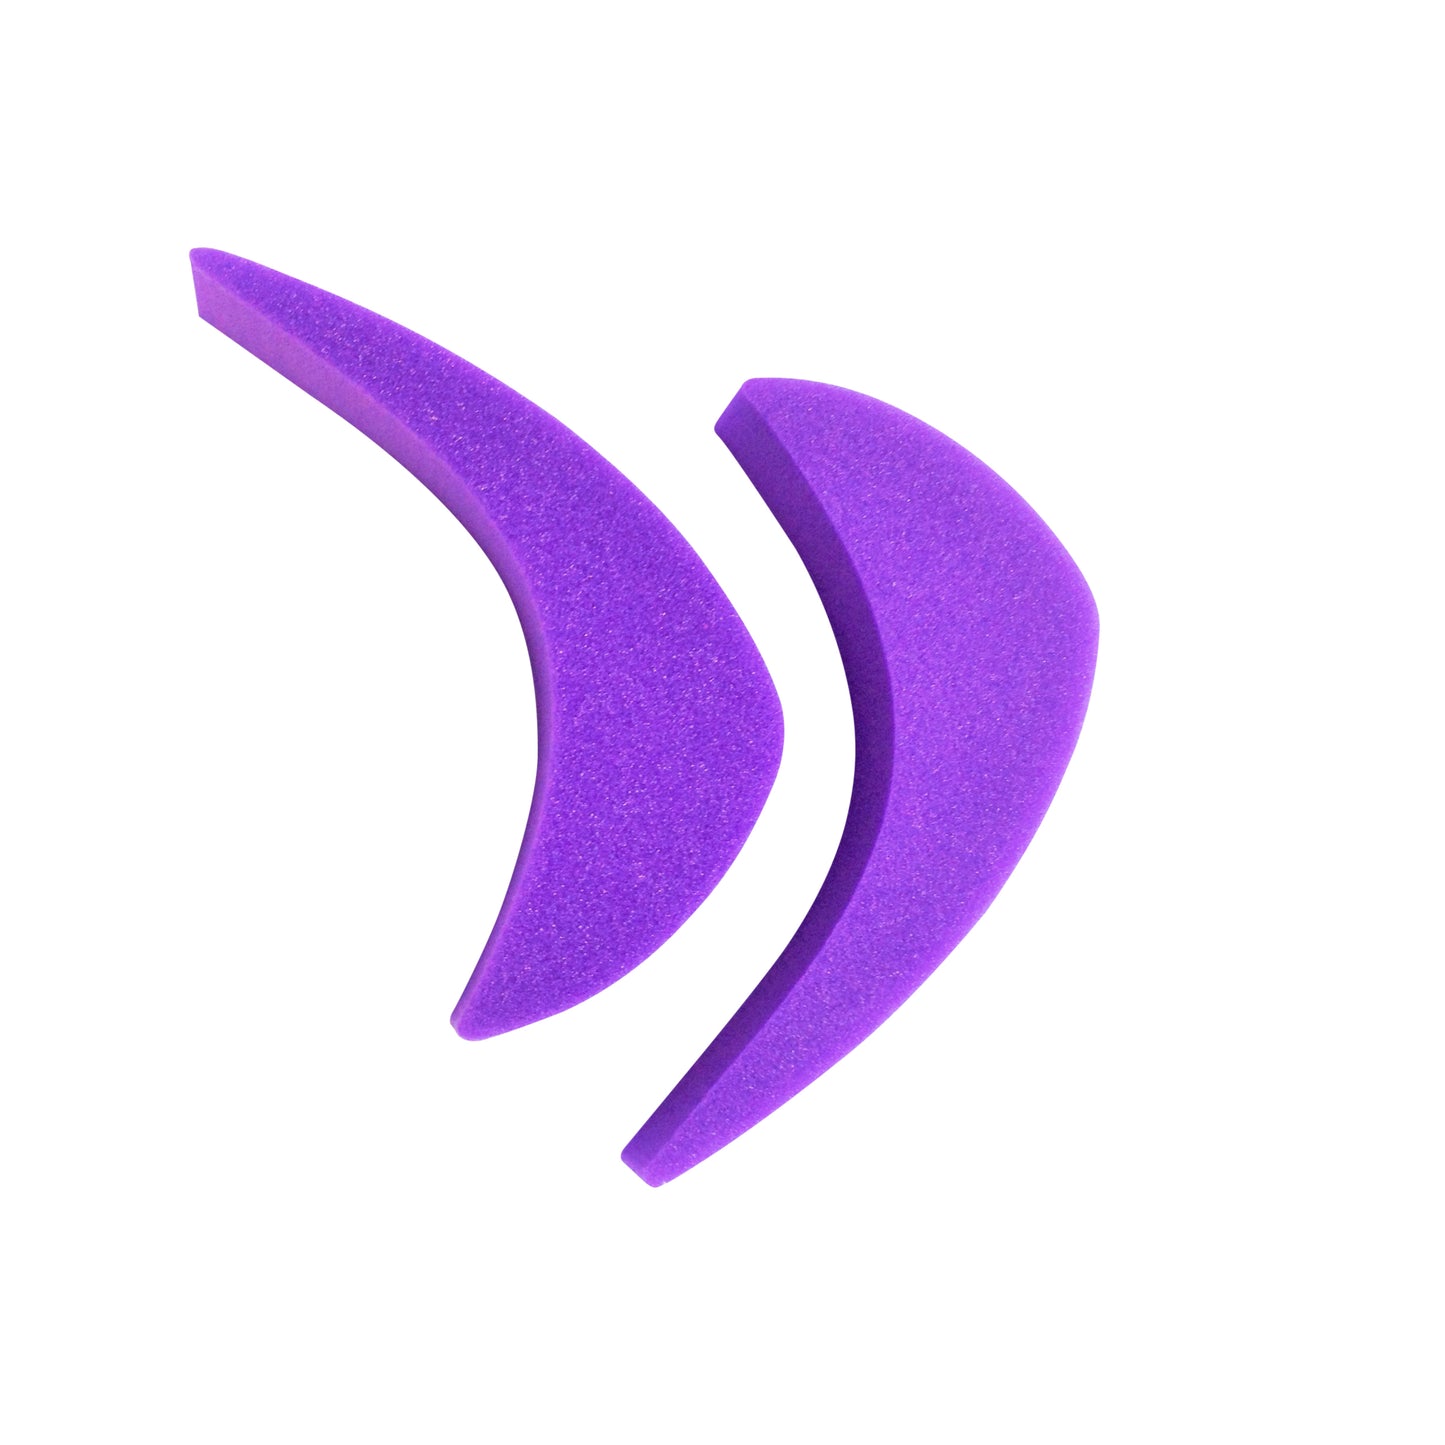 Pointed Shoe Sizing Inserts (1/2 Sizers (Purple))